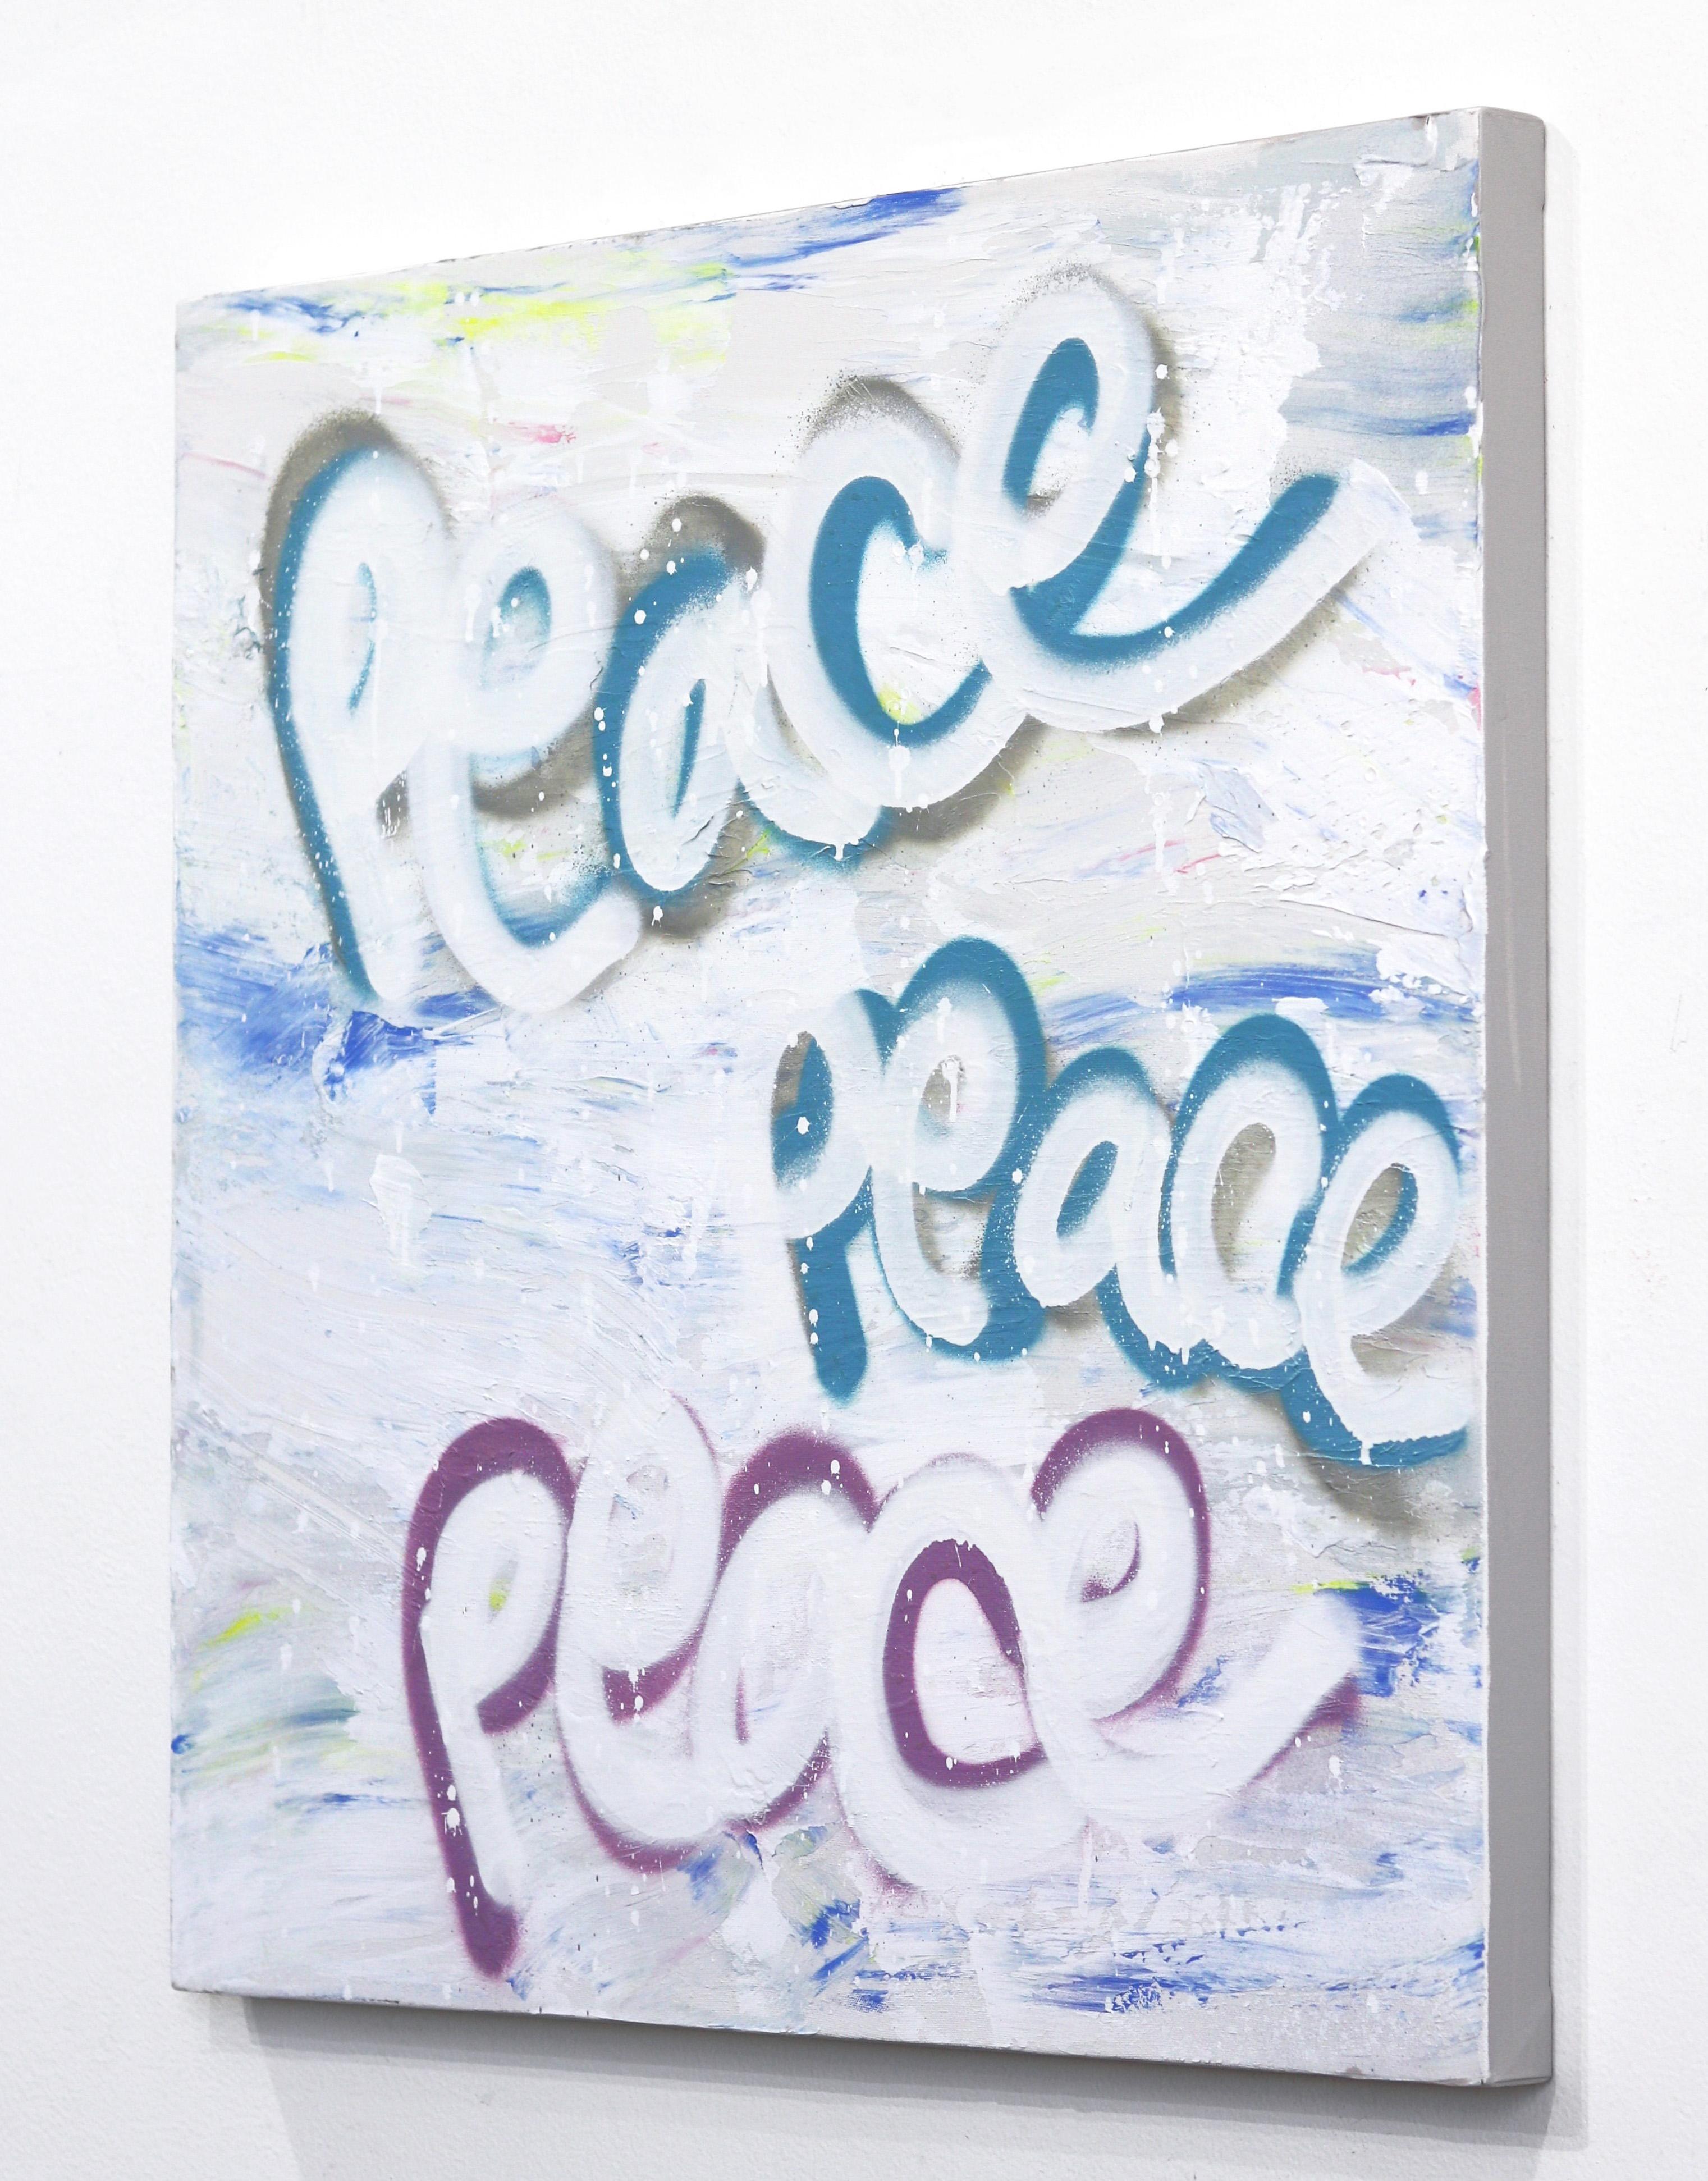 Project Peace - Gray Abstract Painting by Amber Goldhammer